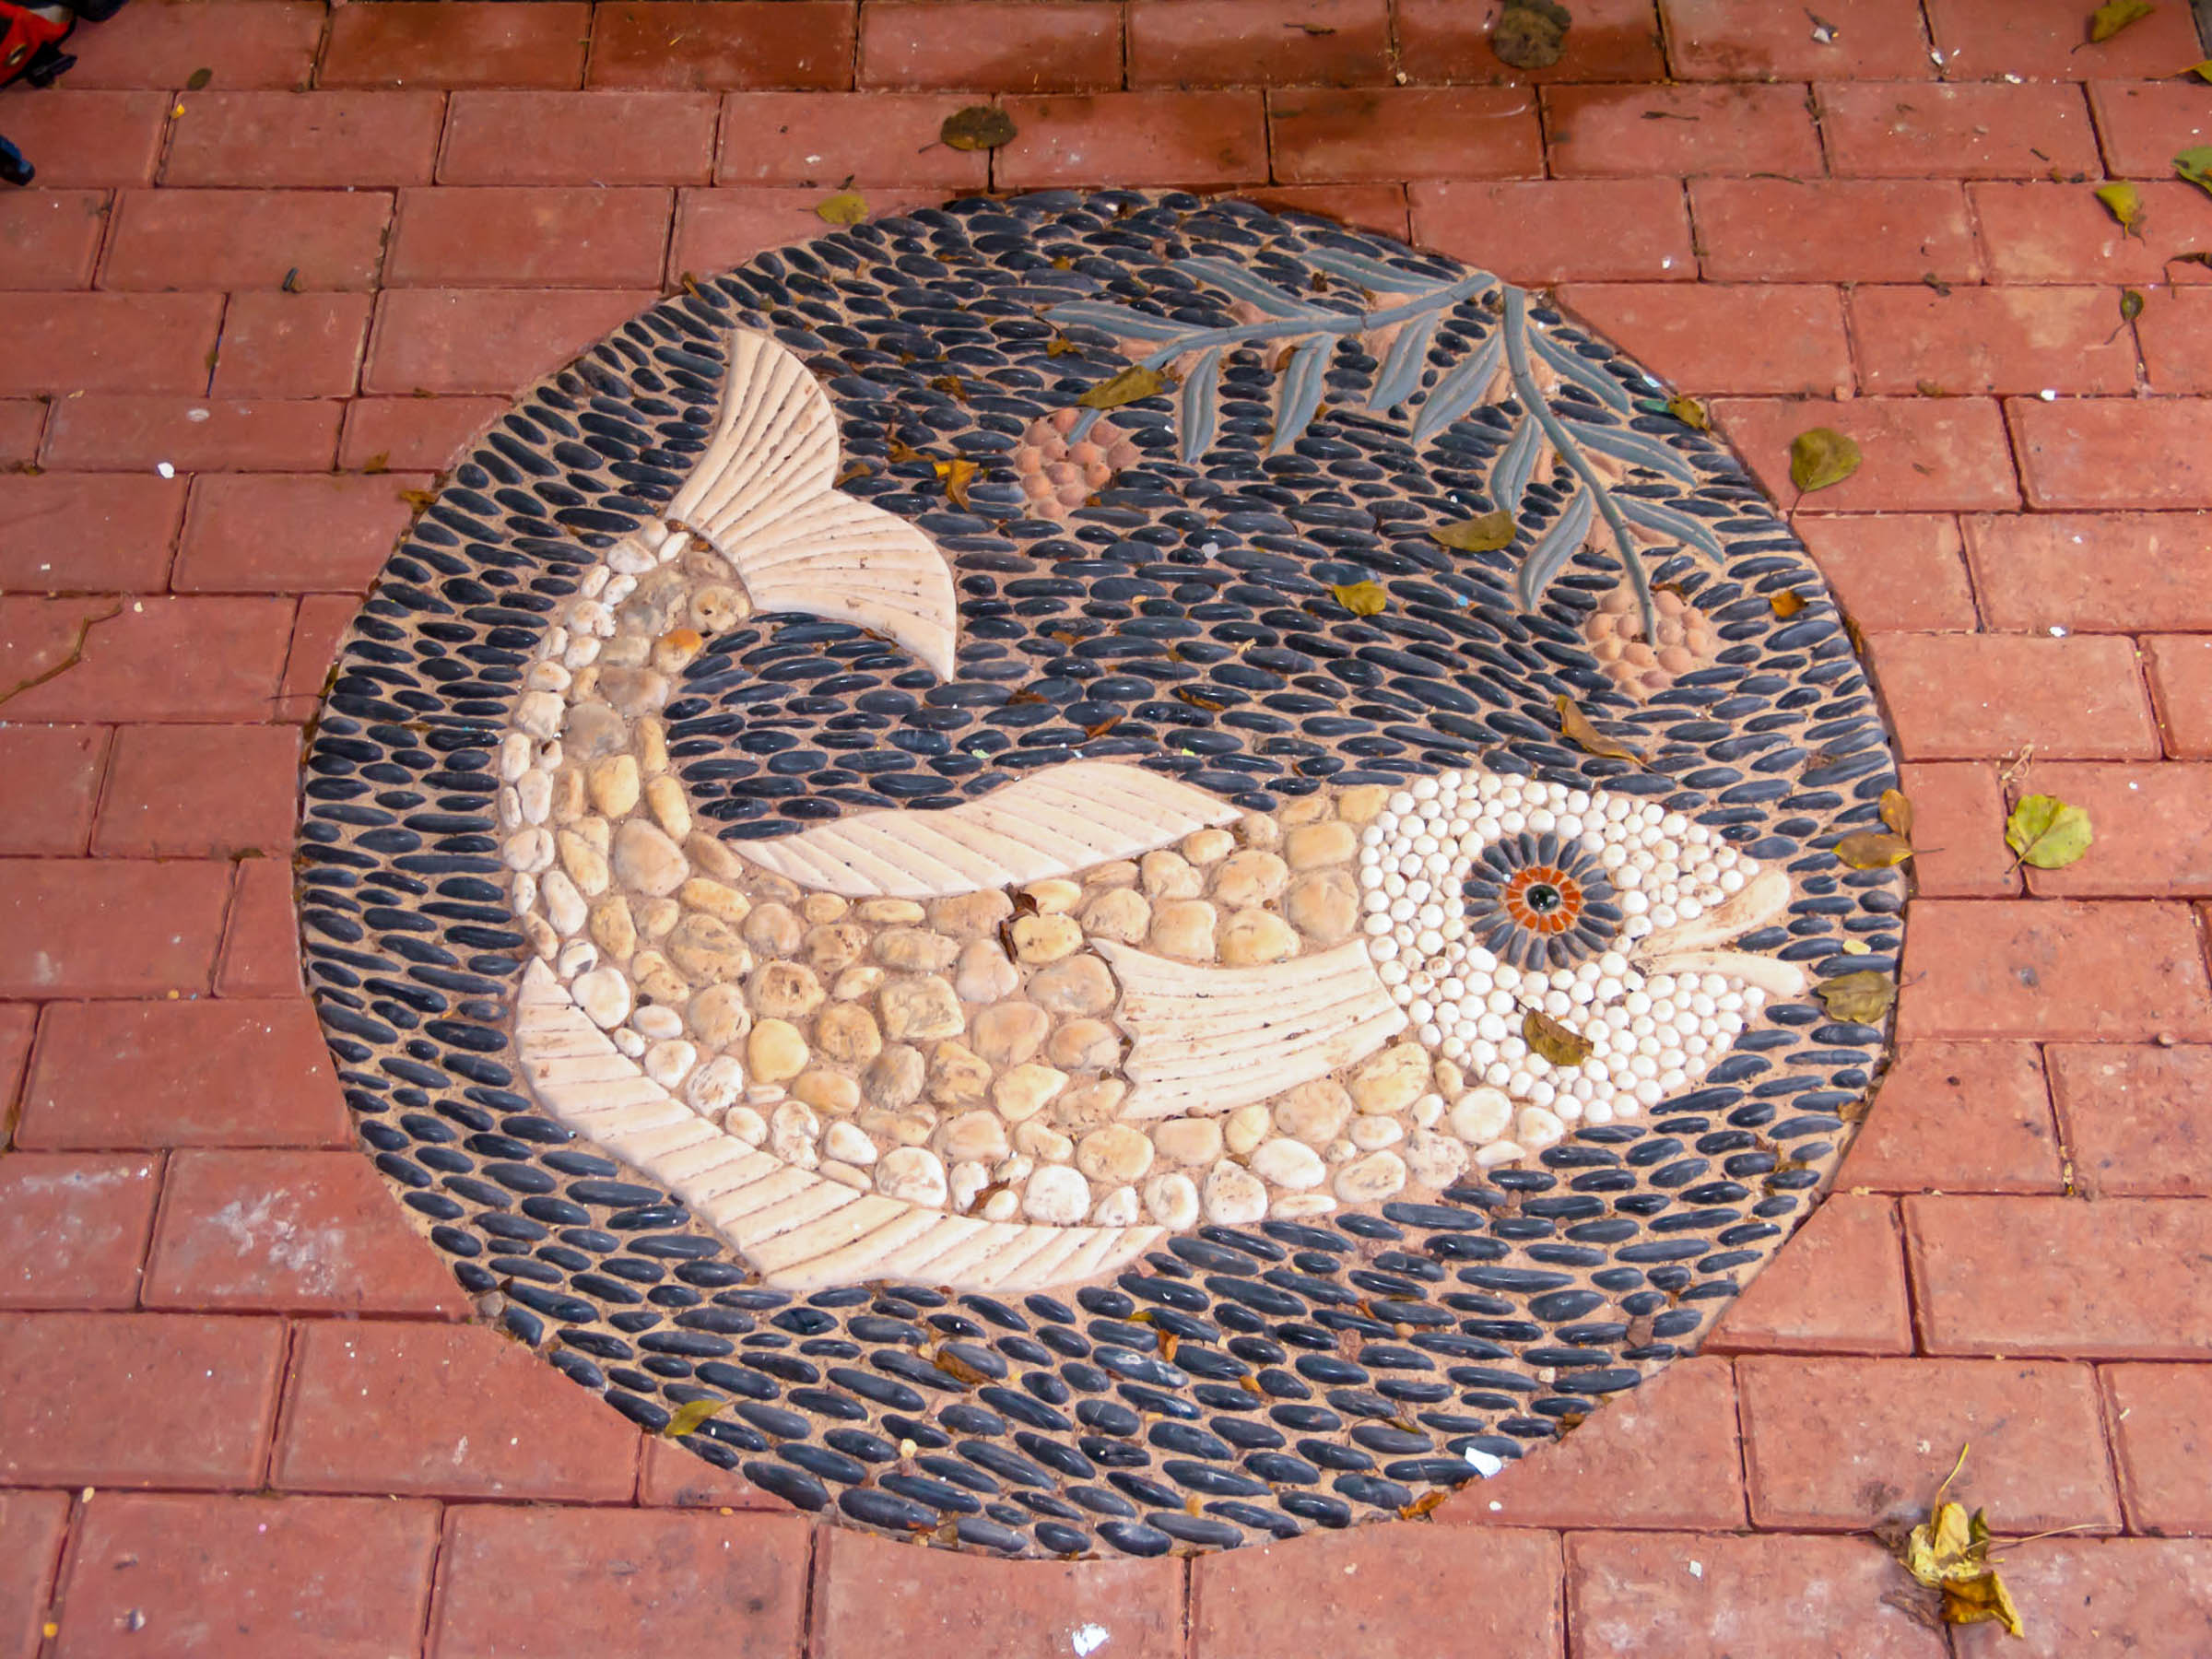 Fish mosaic by another artist